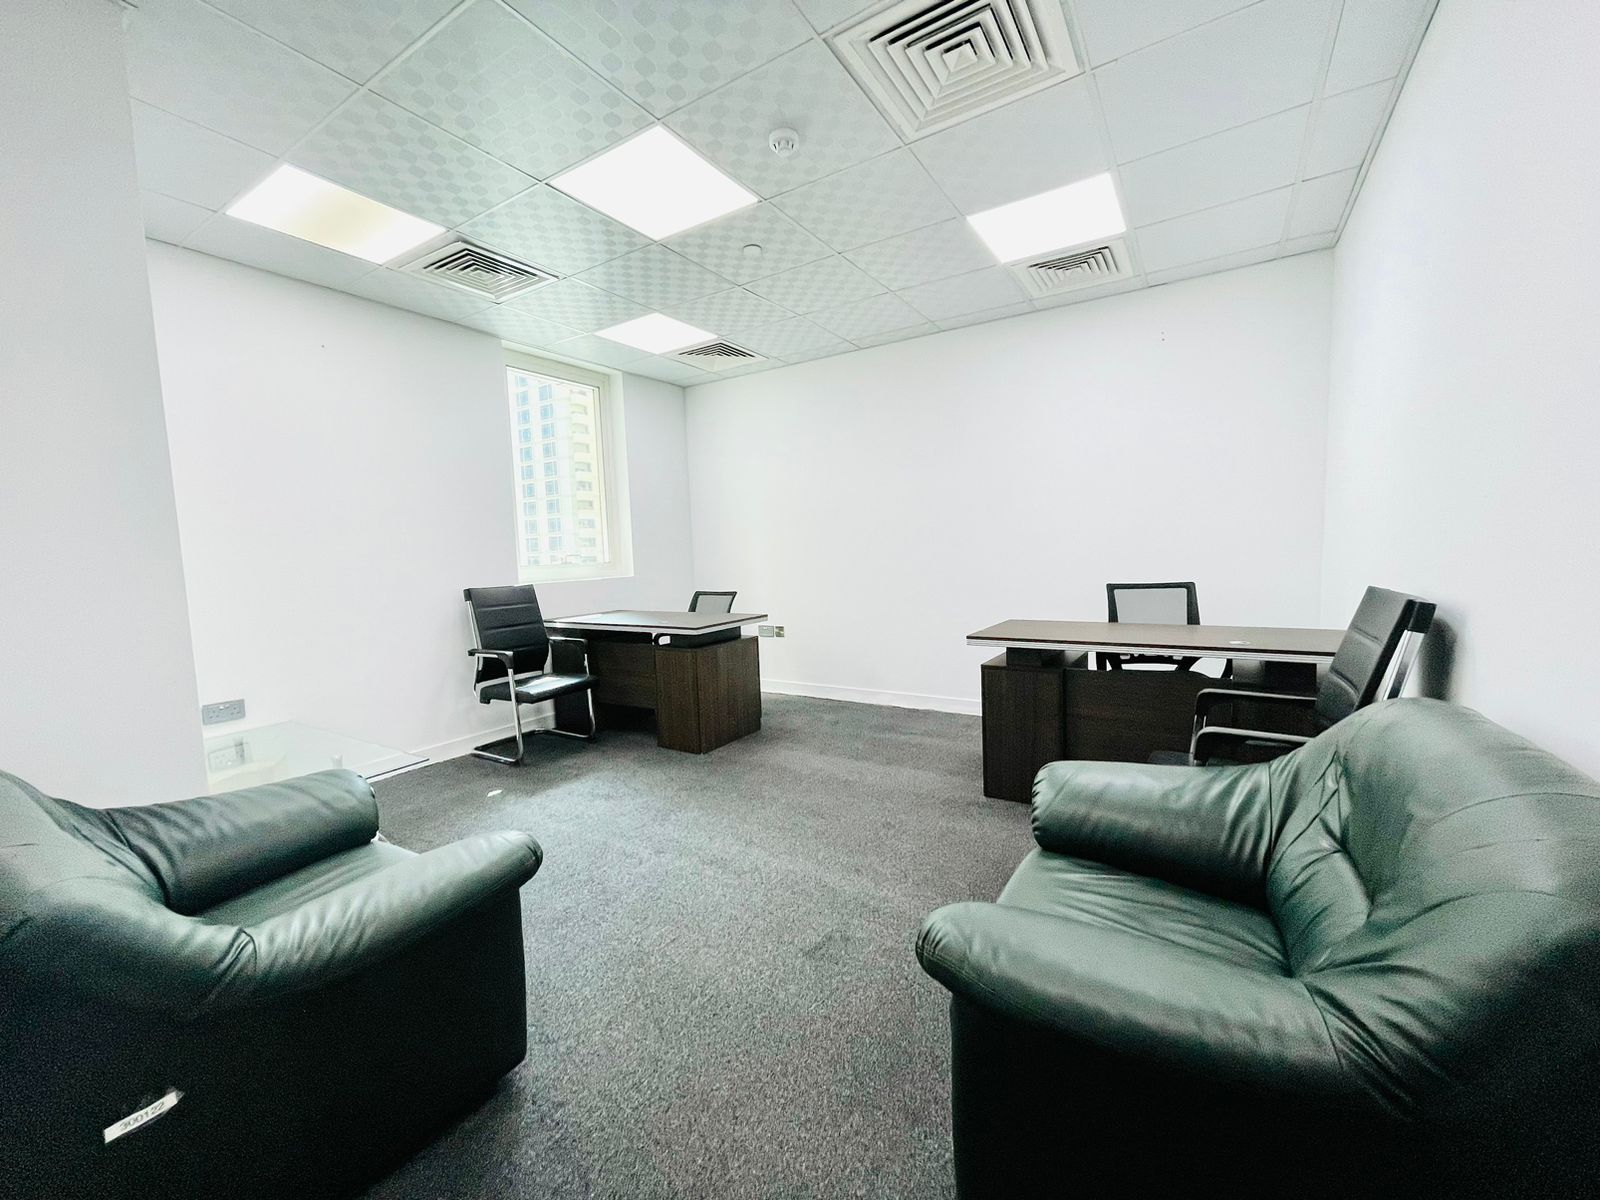 Desirable Well Managed Office With Best Amenities